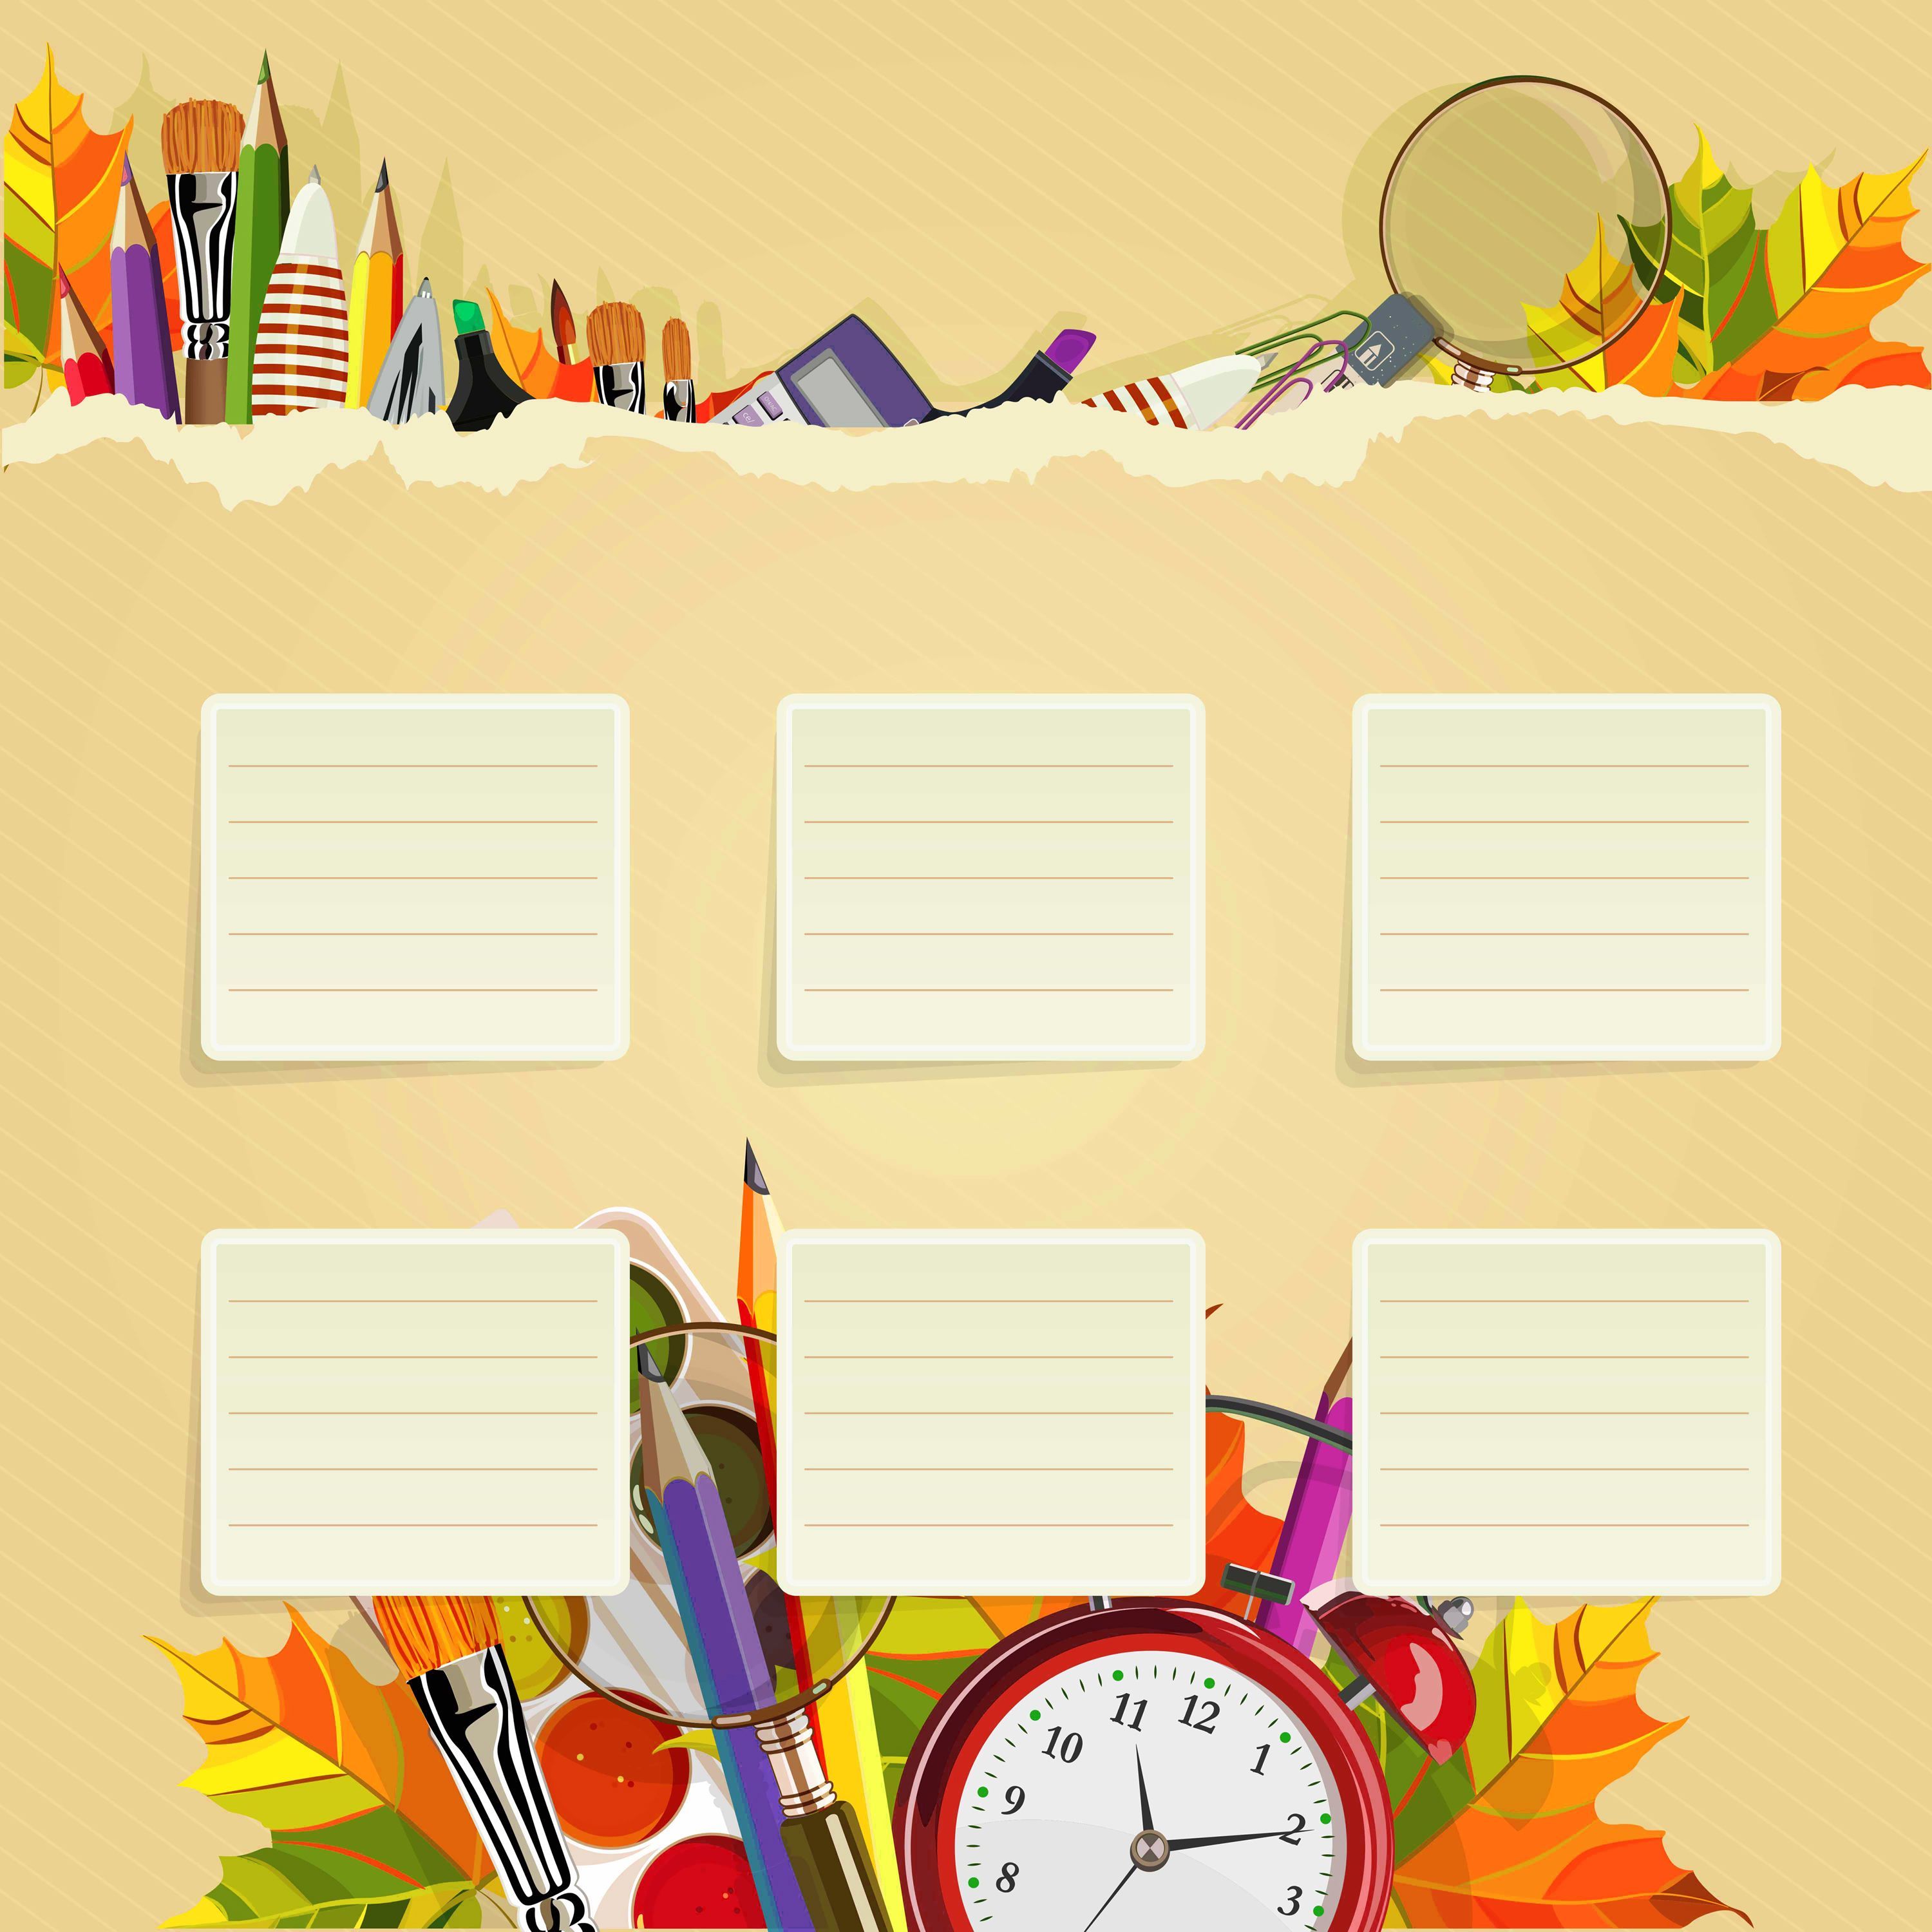 School Schedule Wallpaper Quality Image And Transparent PNG Free Cli. Powerpoint Background Design, Clip Art Borders, School Frame